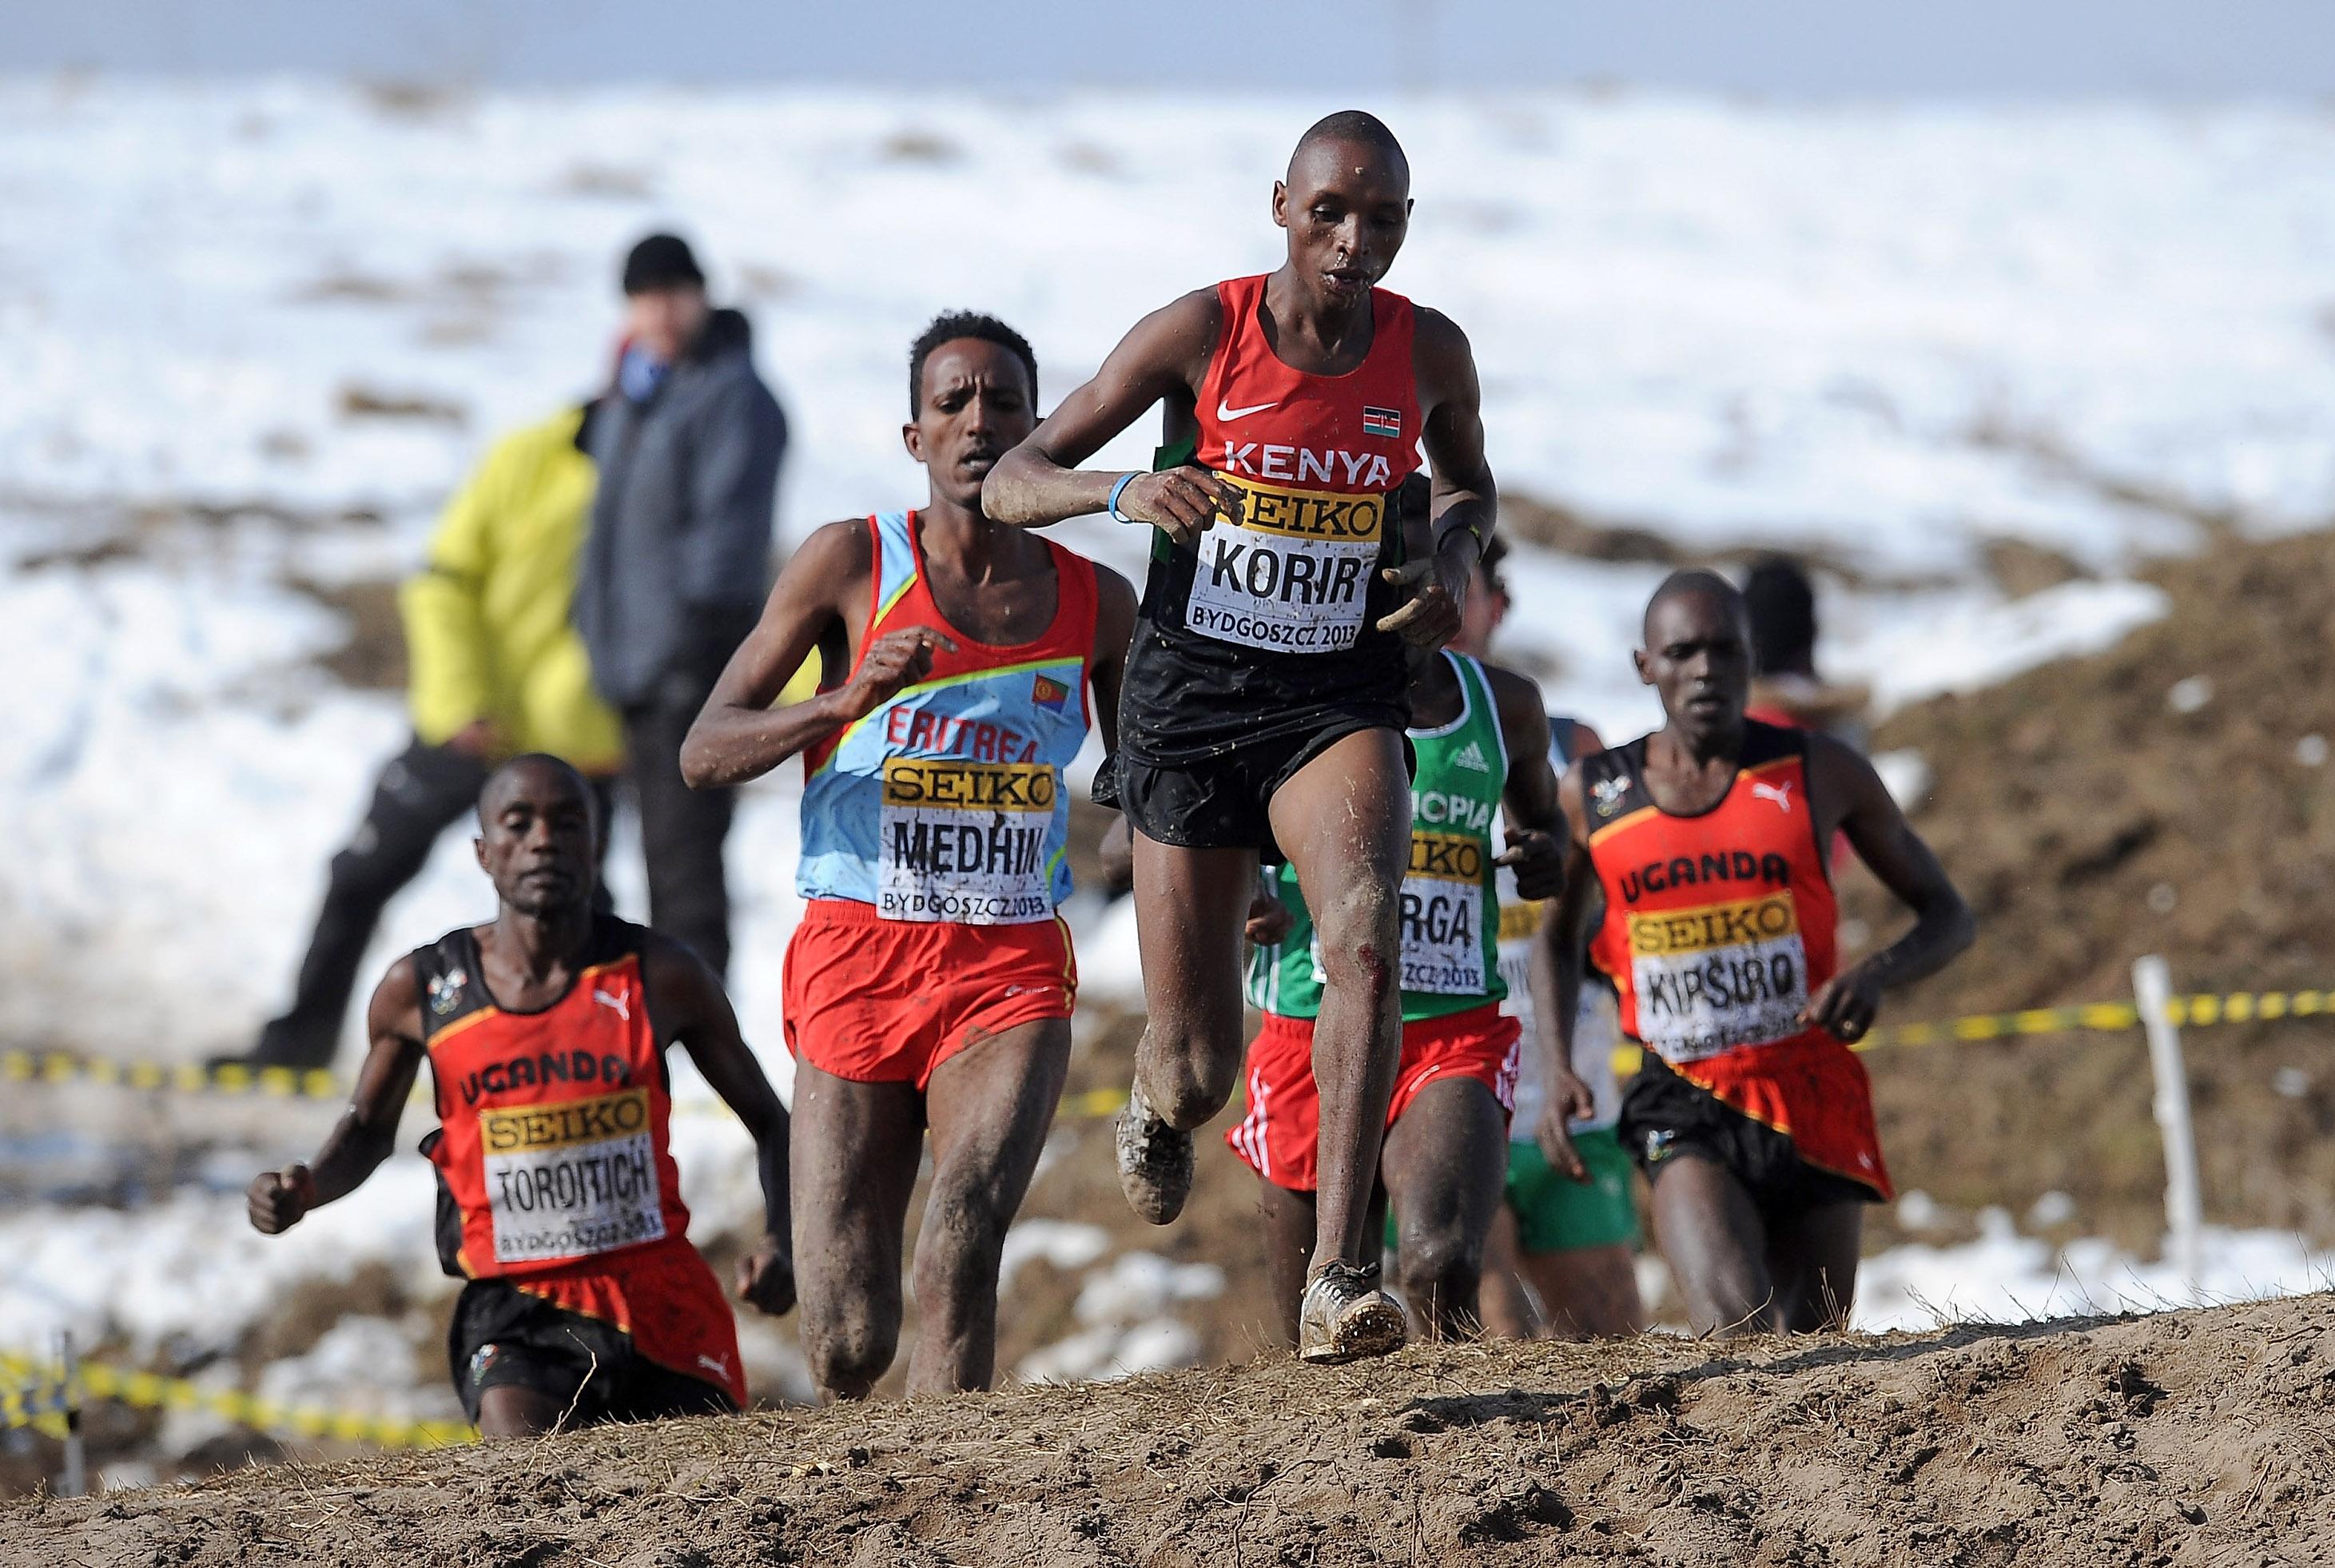 ‘Extreme’ Cross-Country Running to be Rolled-Out in Time for Paris 2024 Bid